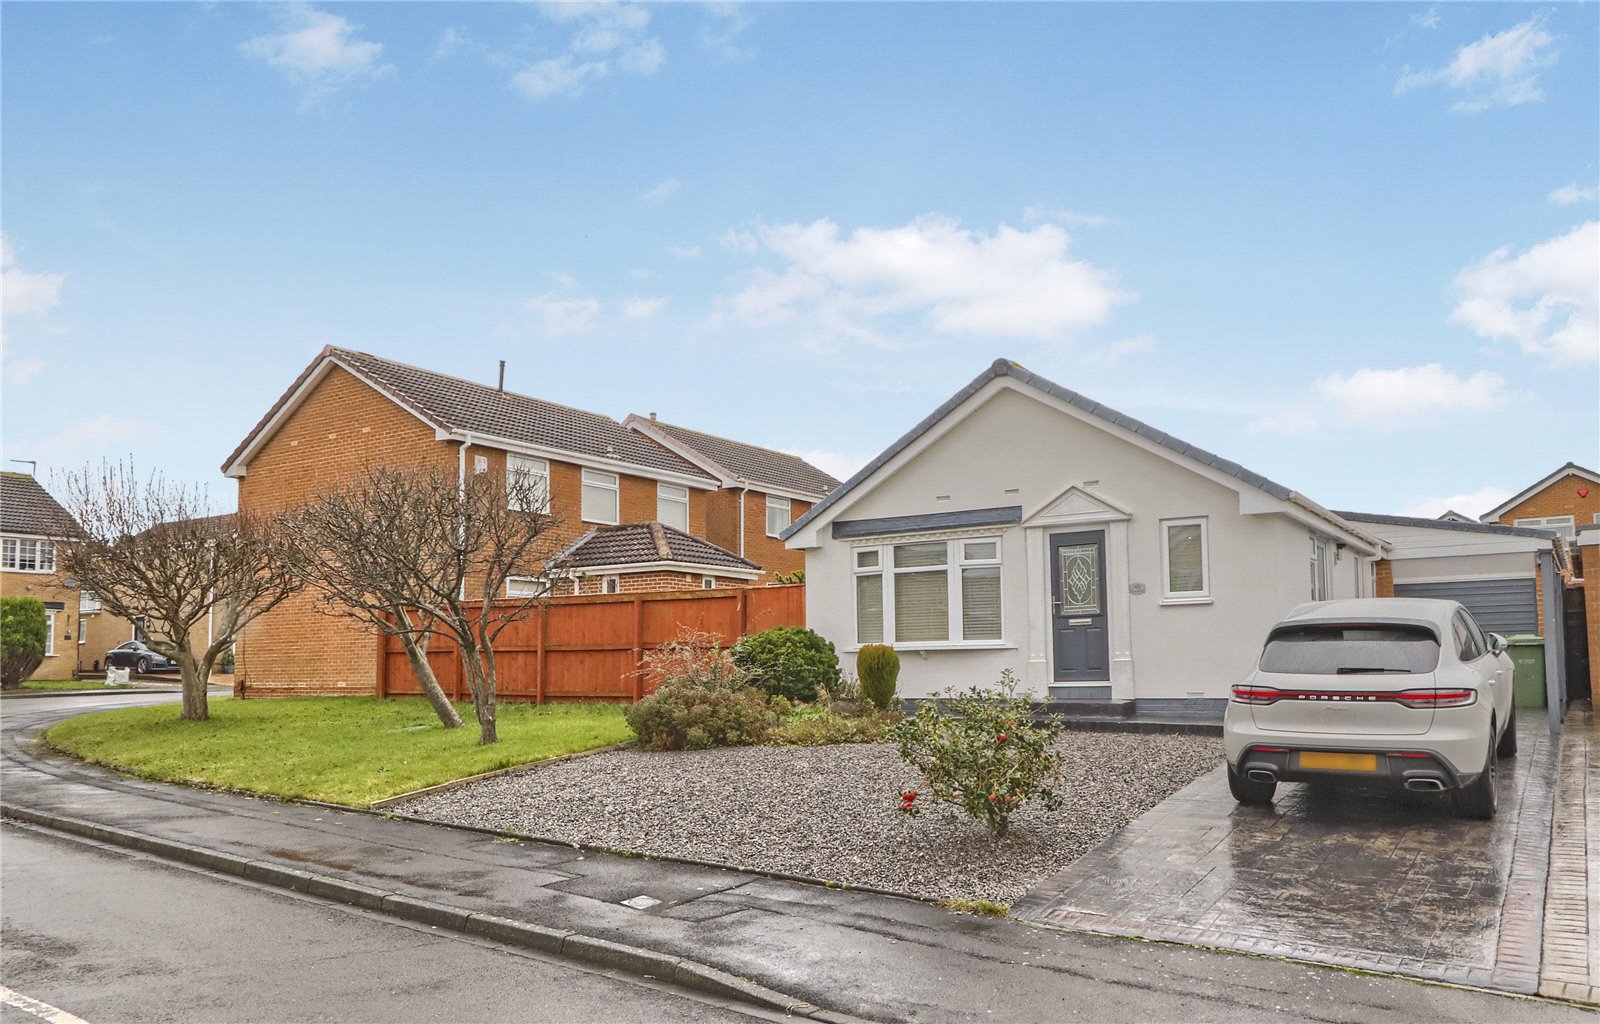 2 bed bungalow for sale in Norwood Close, Stockton-on-Tees  - Property Image 1